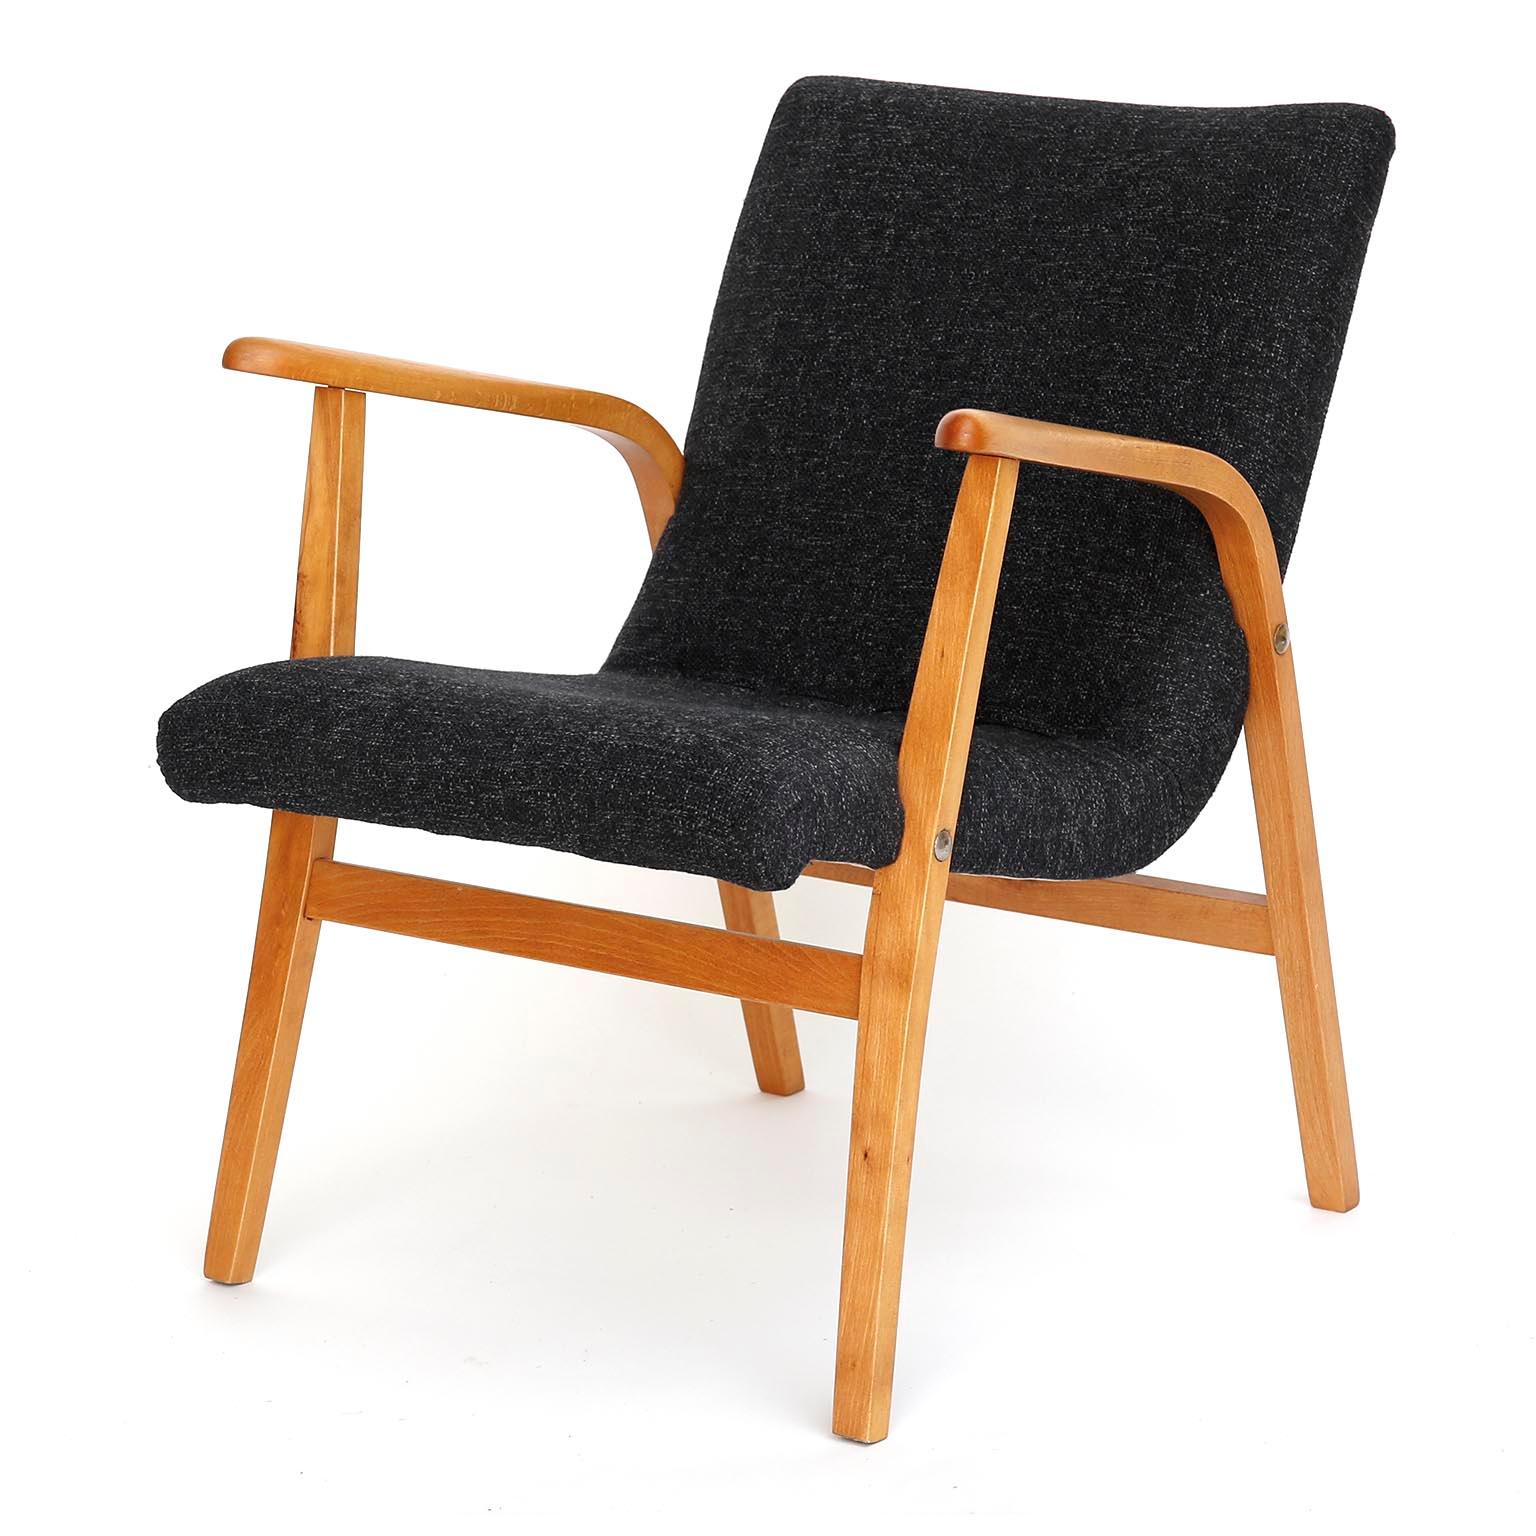 A midcentury lounge chair designed by Roland Rainer for the 